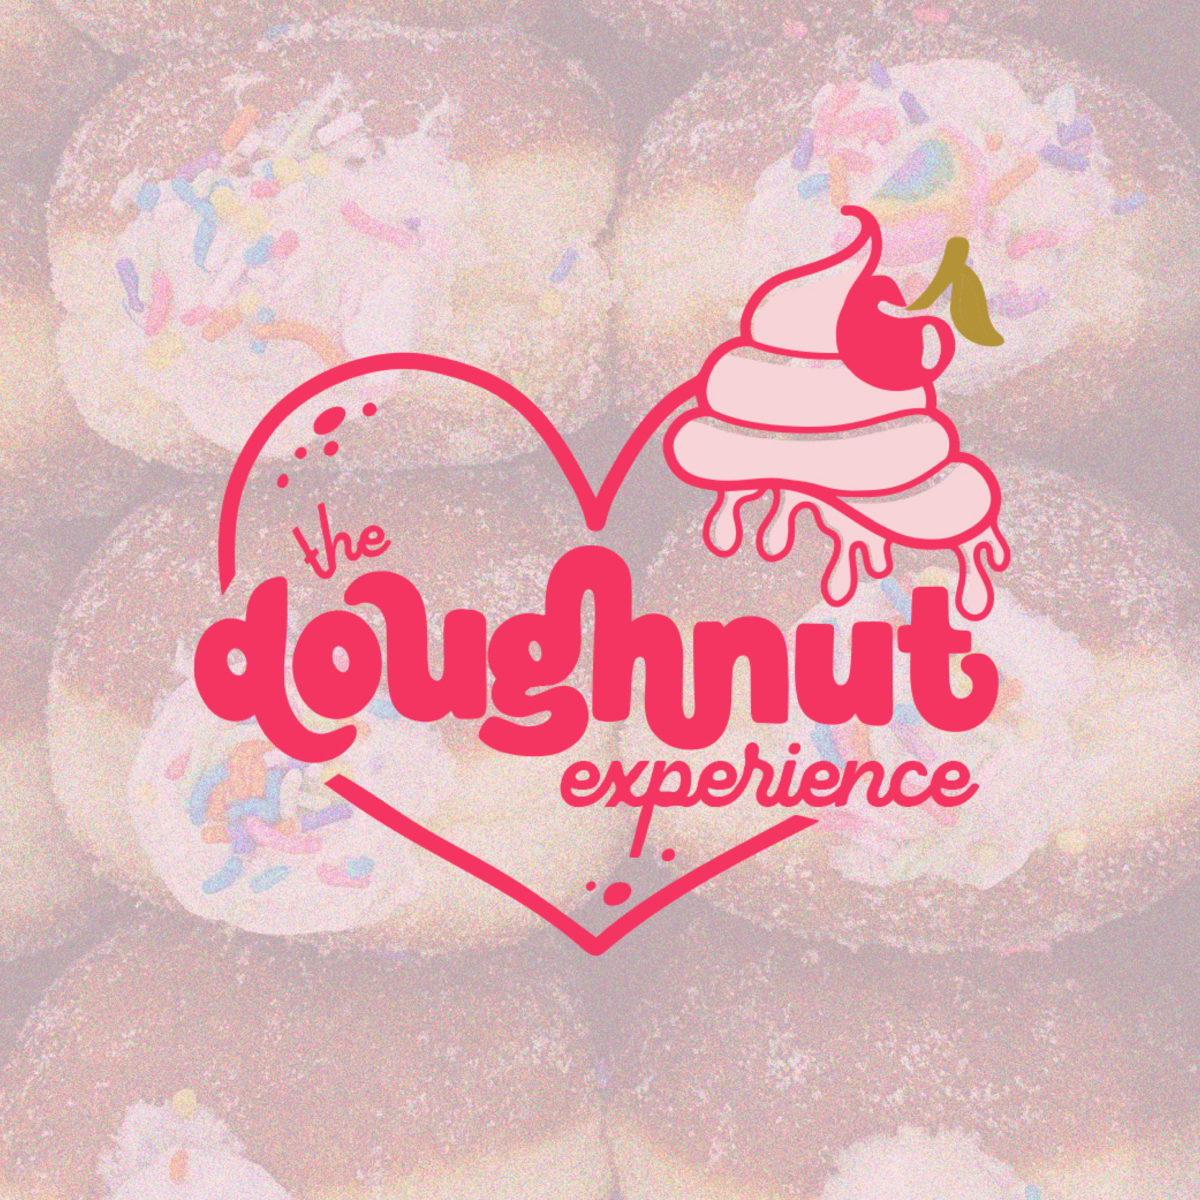 Vibrant cheeky doughnut bakery brand design. Features hand lettering and hand illustrated elements for a unique brand that helps you stand out from the crowd